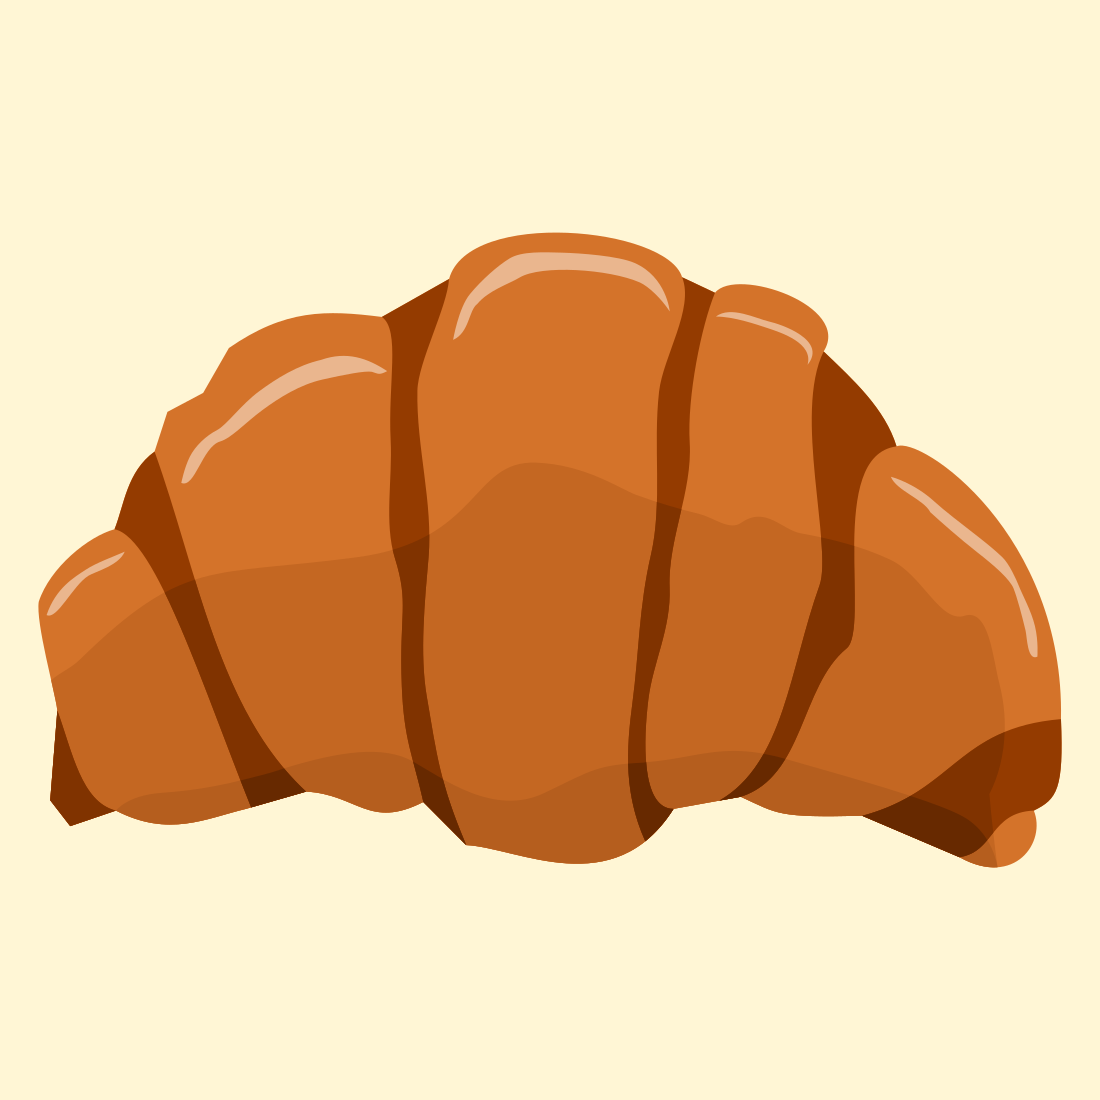 Croissant Vector Graphic Illustration preview image.